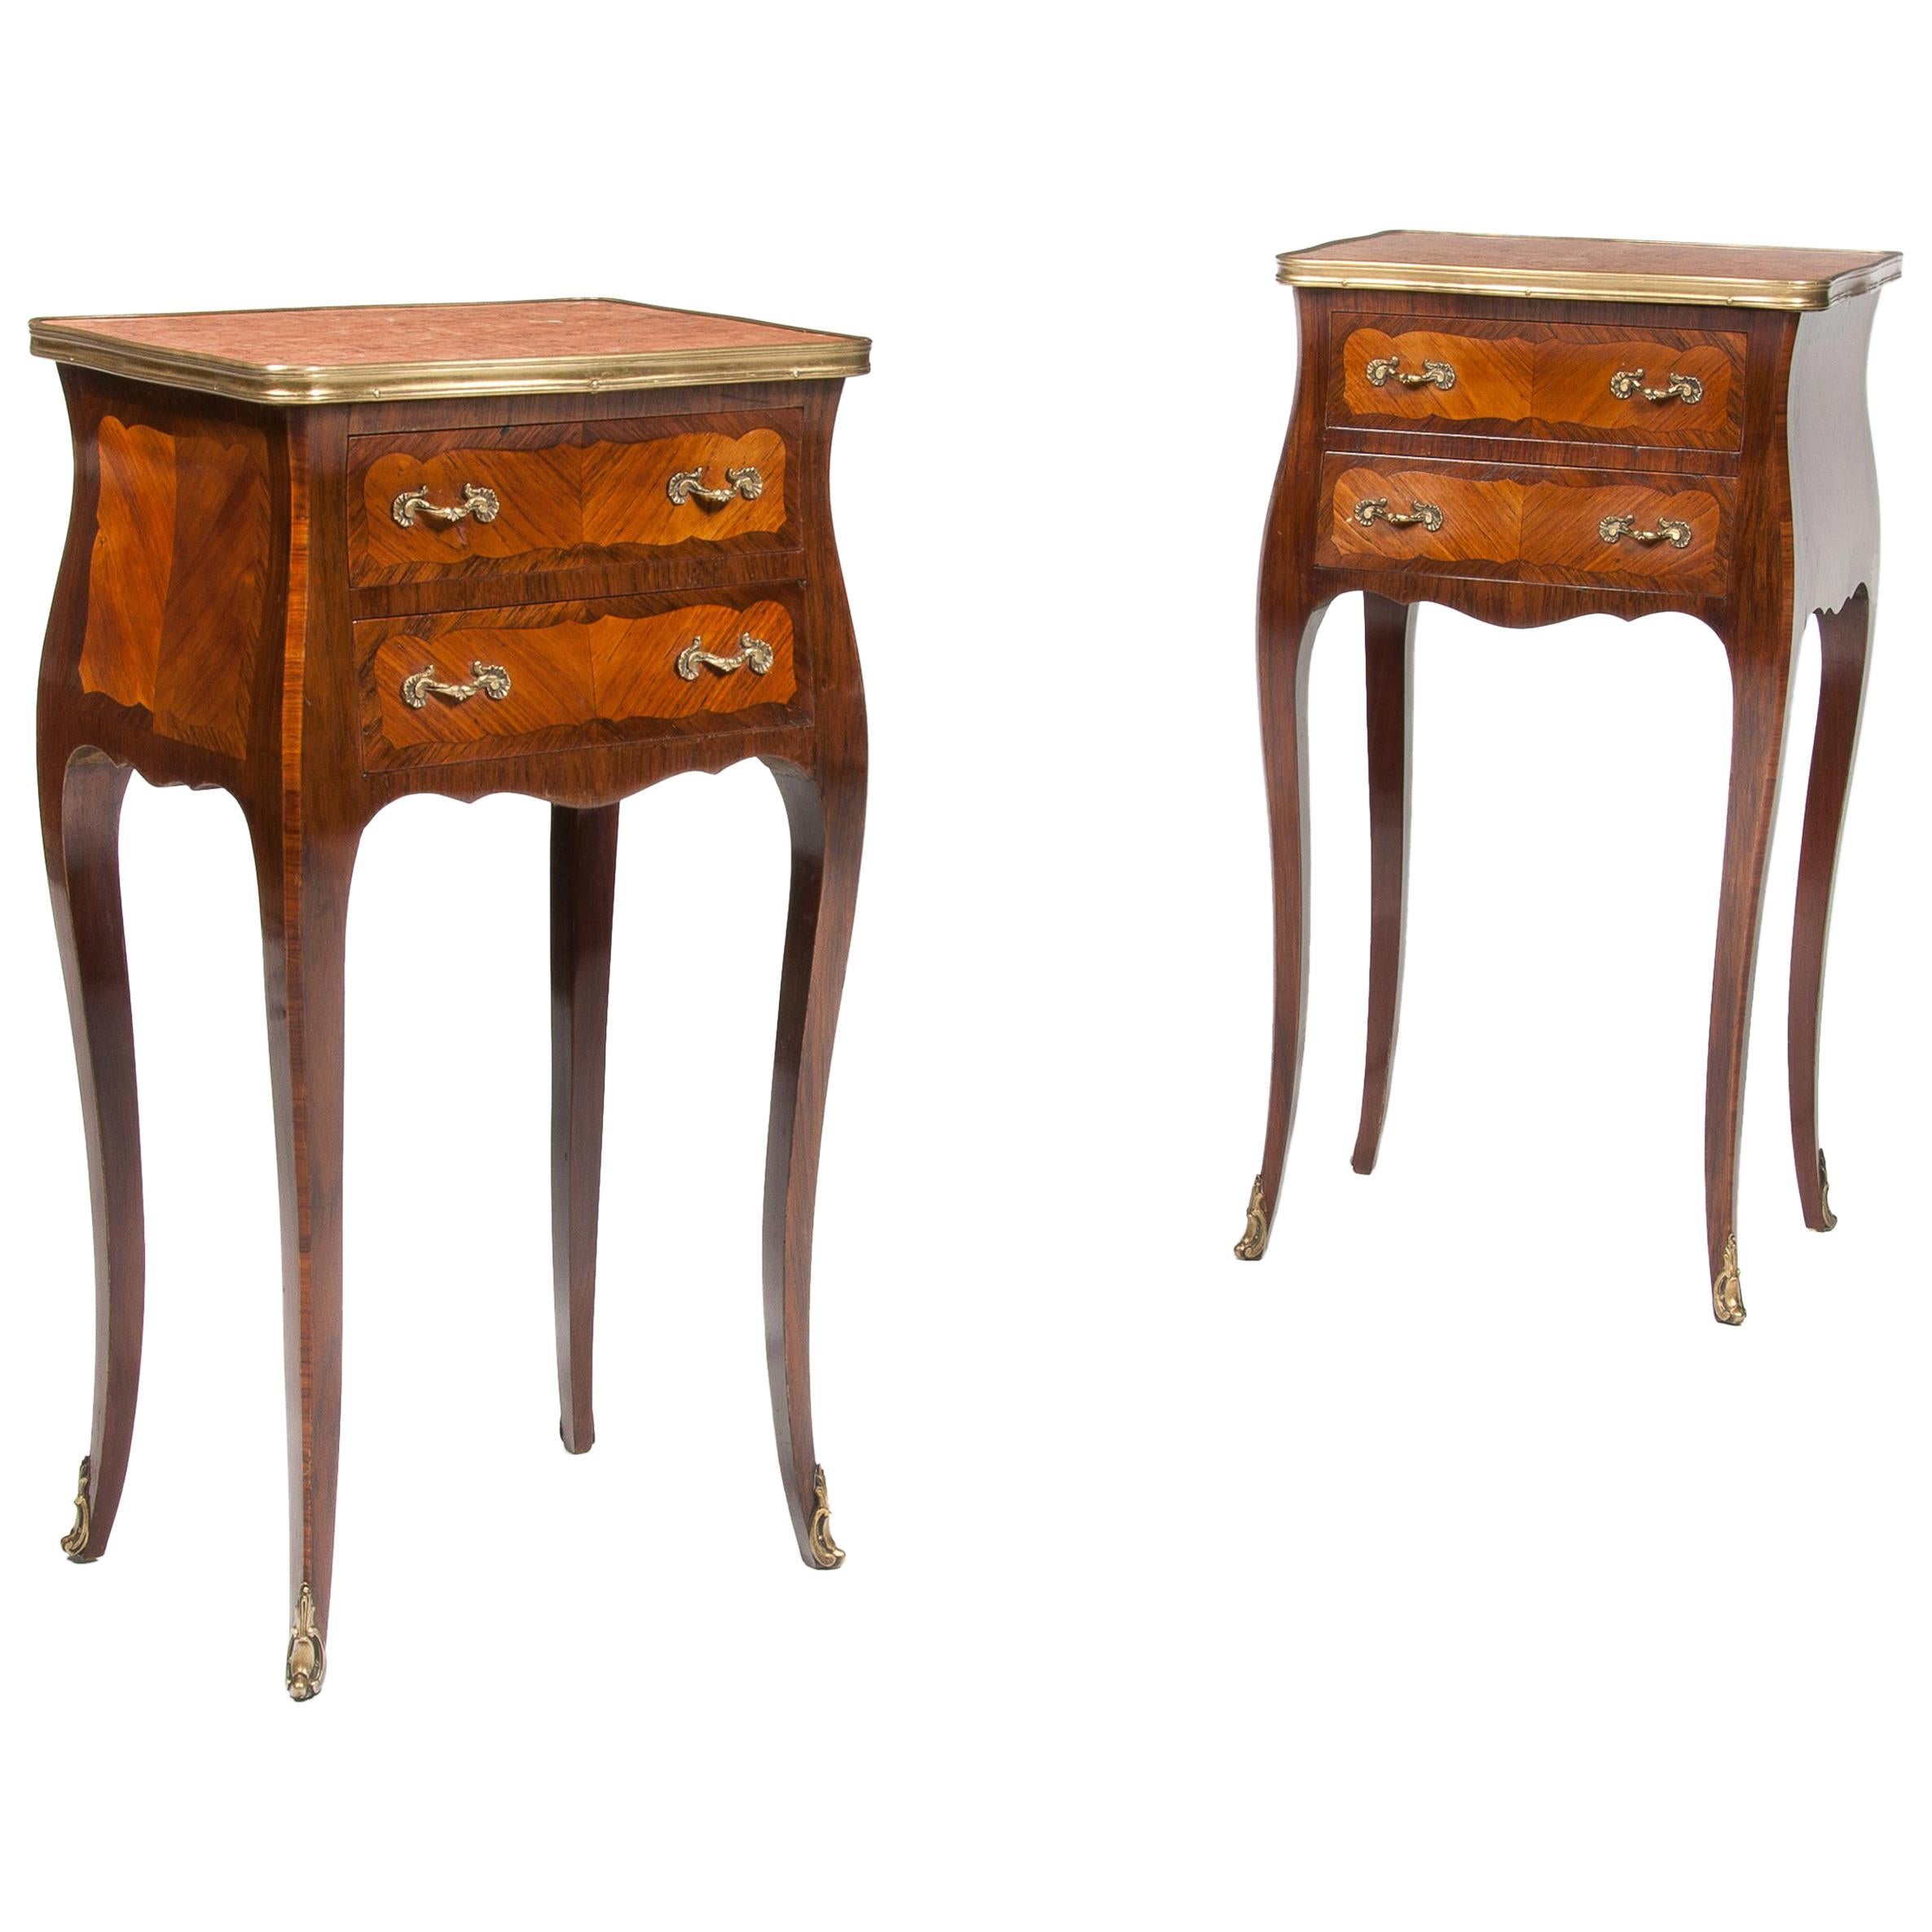 Elegant Pair of Antique French Marble-Top Bedside Cabinets